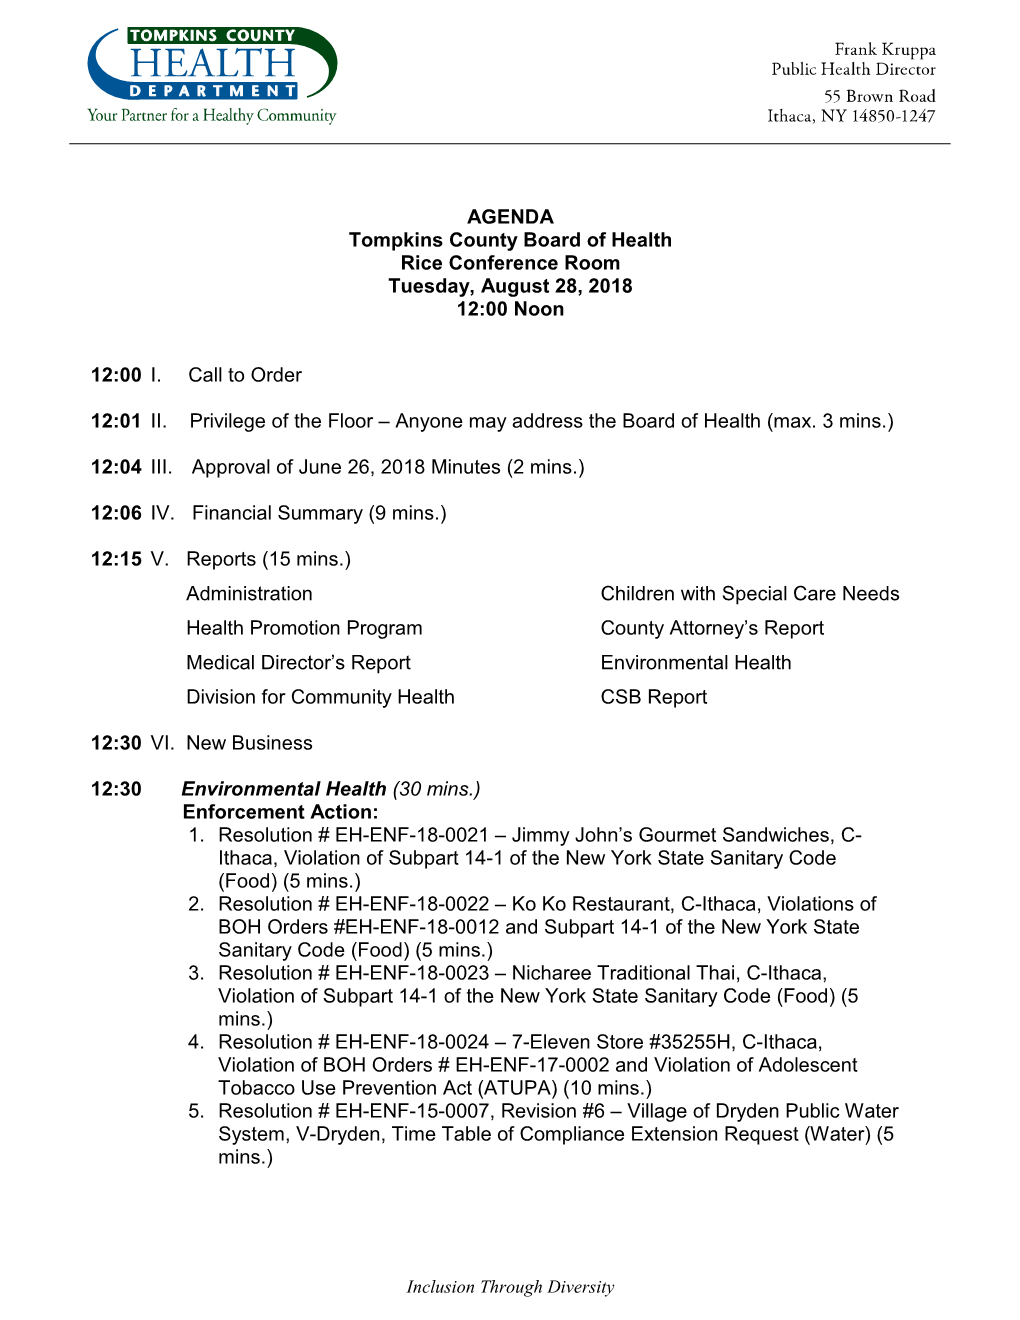 AGENDA Tompkins County Board of Health Rice Conference Room Tuesday, August 28, 2018 12:00 Noon